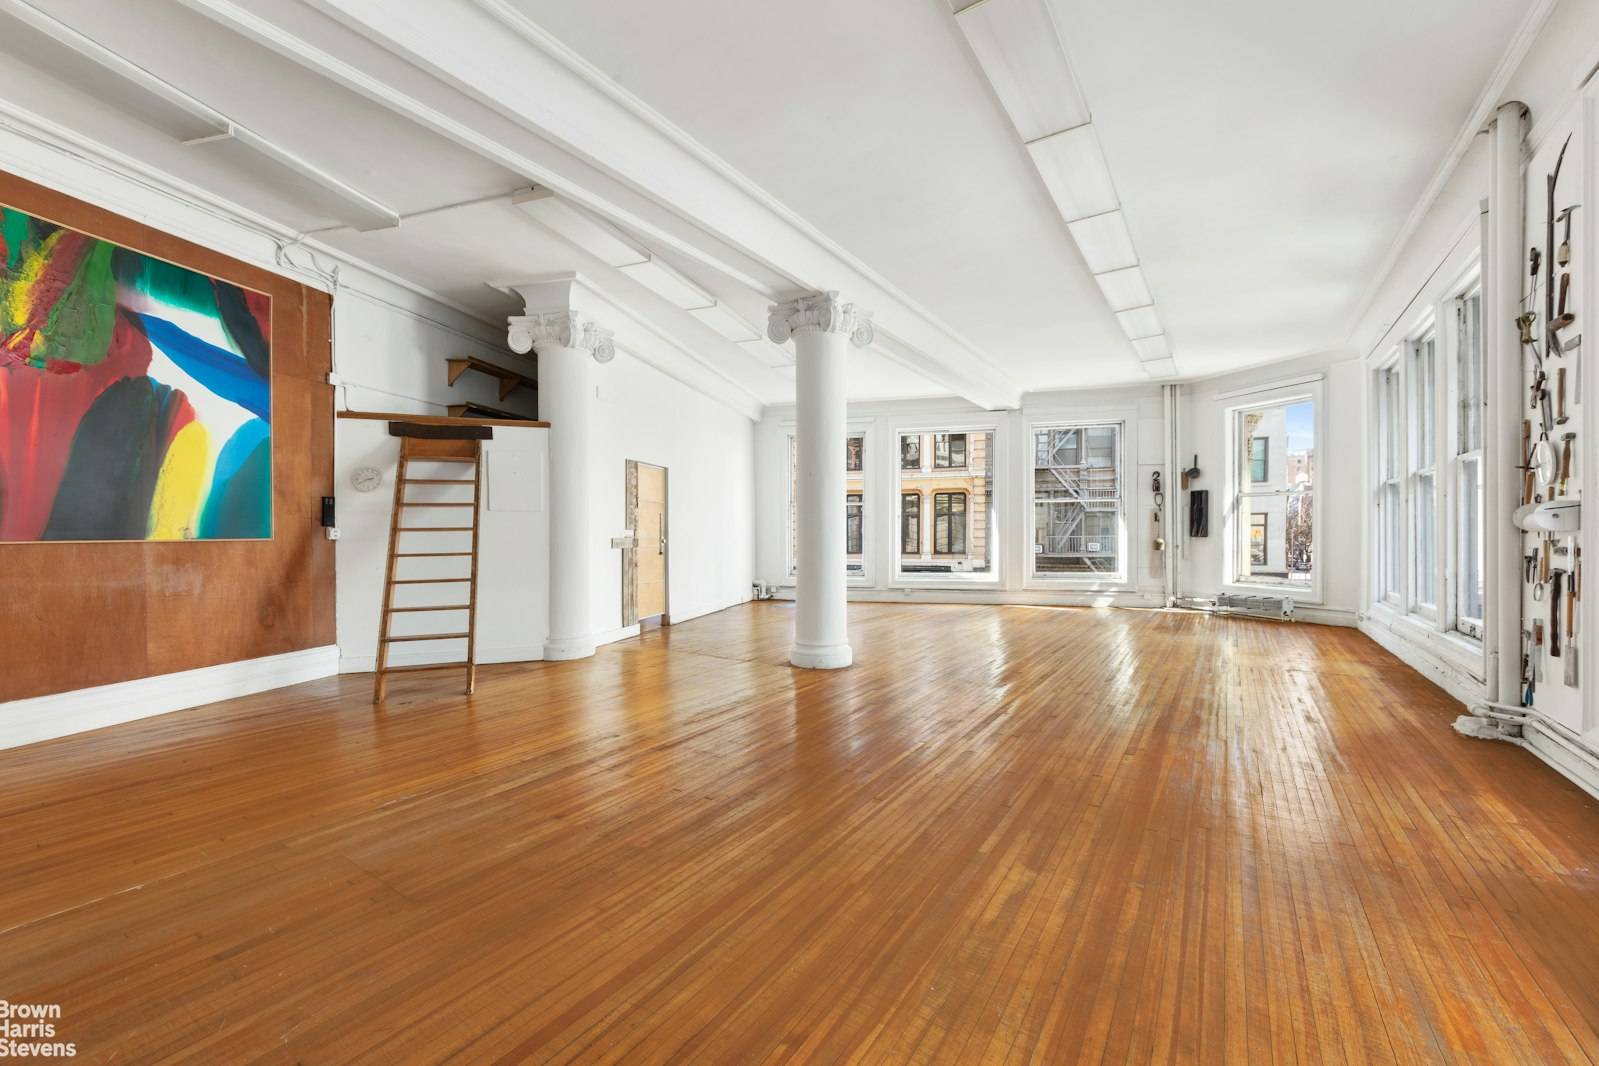 Bring your architect and your creative vision to this dramatic 3, 000SF corner loft located in a distinguished landmarked building where Greenwich Village meets Union Square.